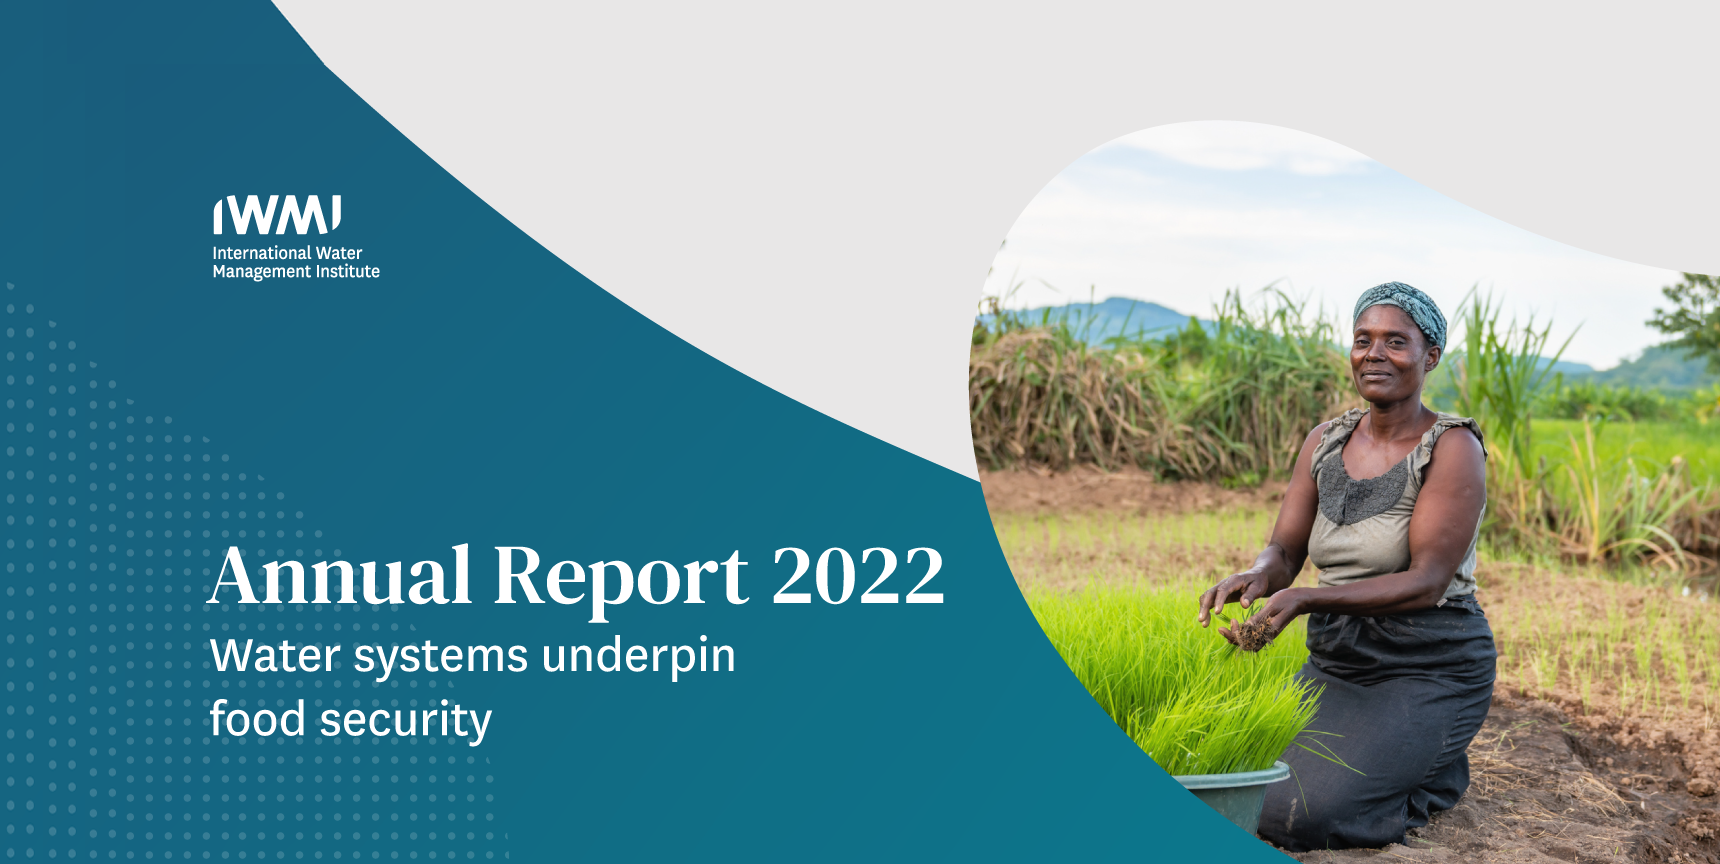 Annual Report 2022 launched